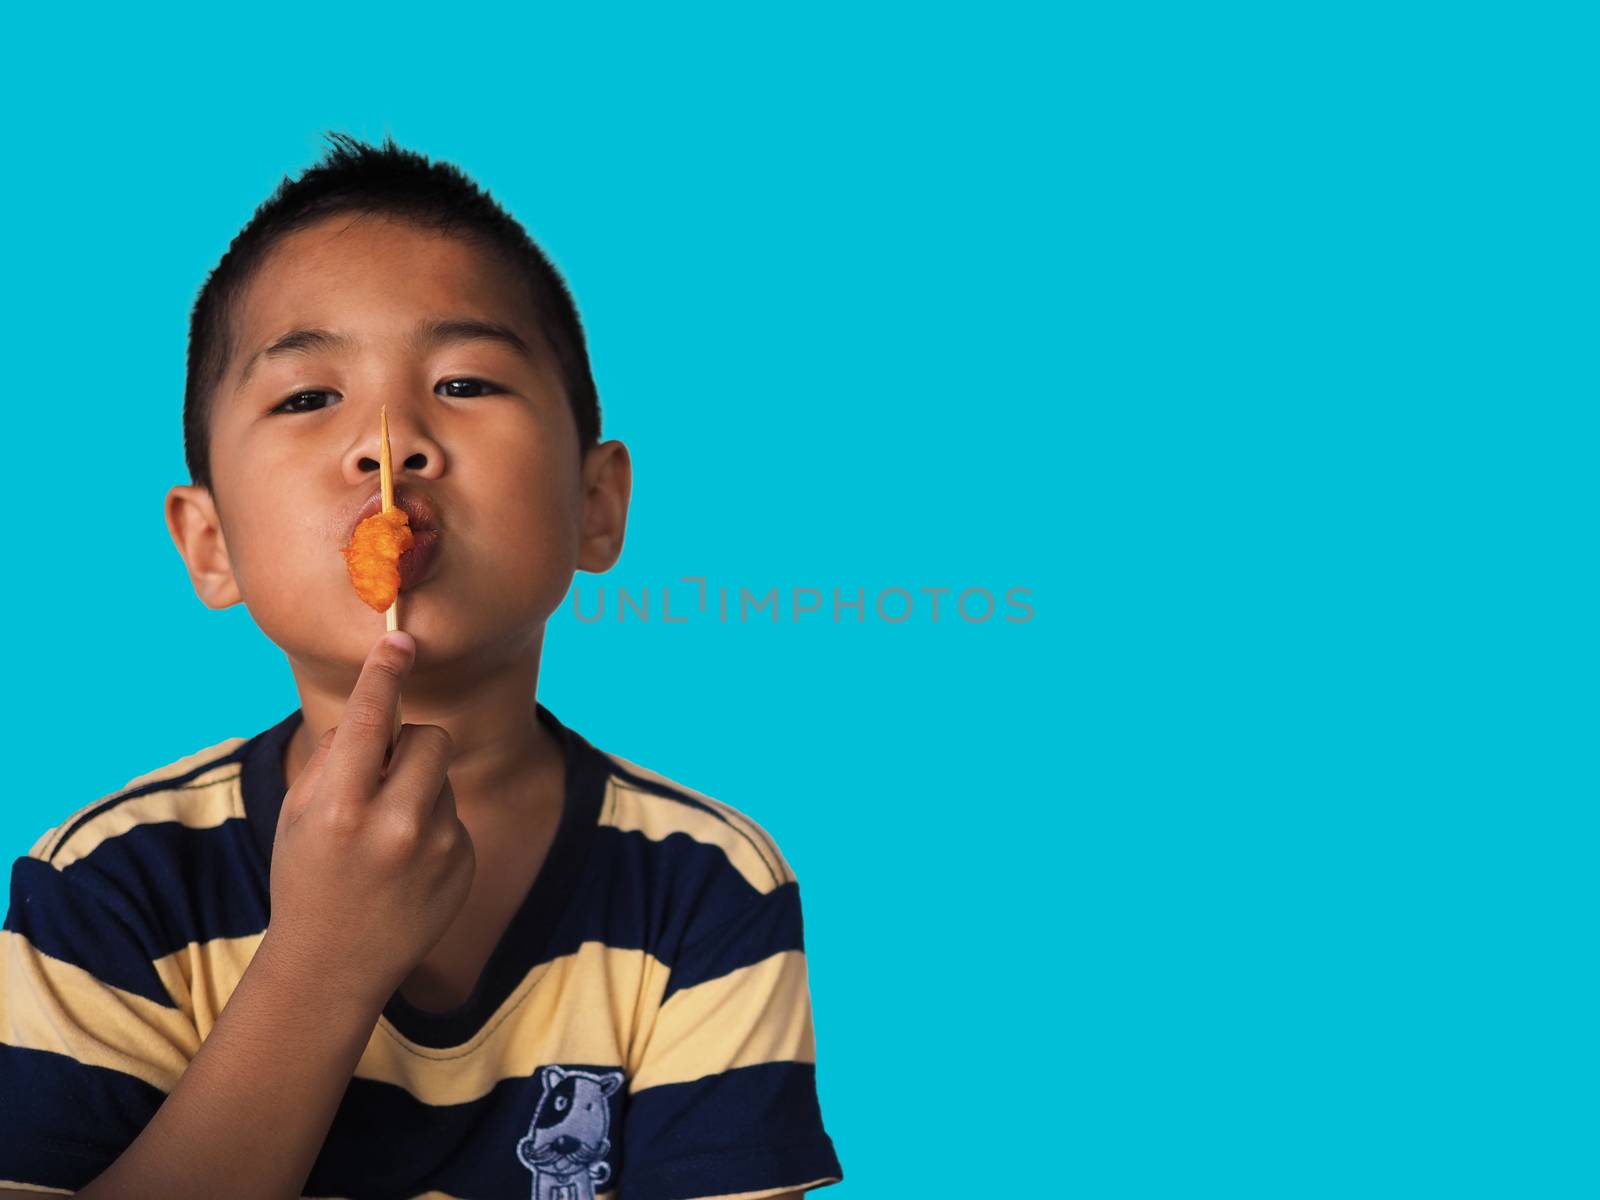 Portrait of a boy eating a hot dog Isolated from on the blue bac by Unimages2527